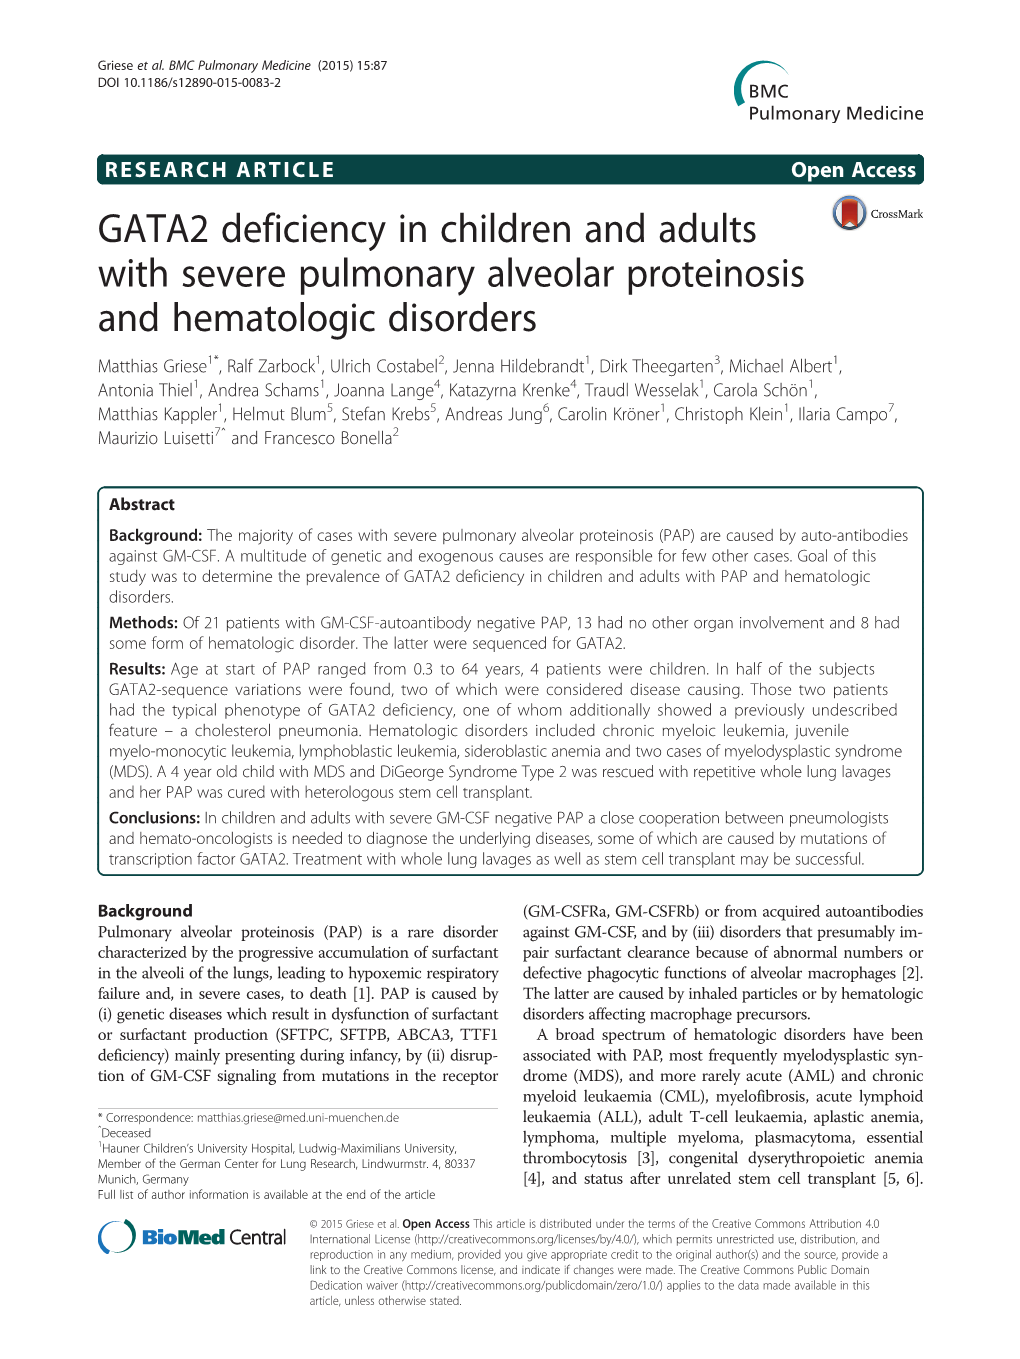 GATA2 Deficiency in Children and Adults with Severe Pulmonary